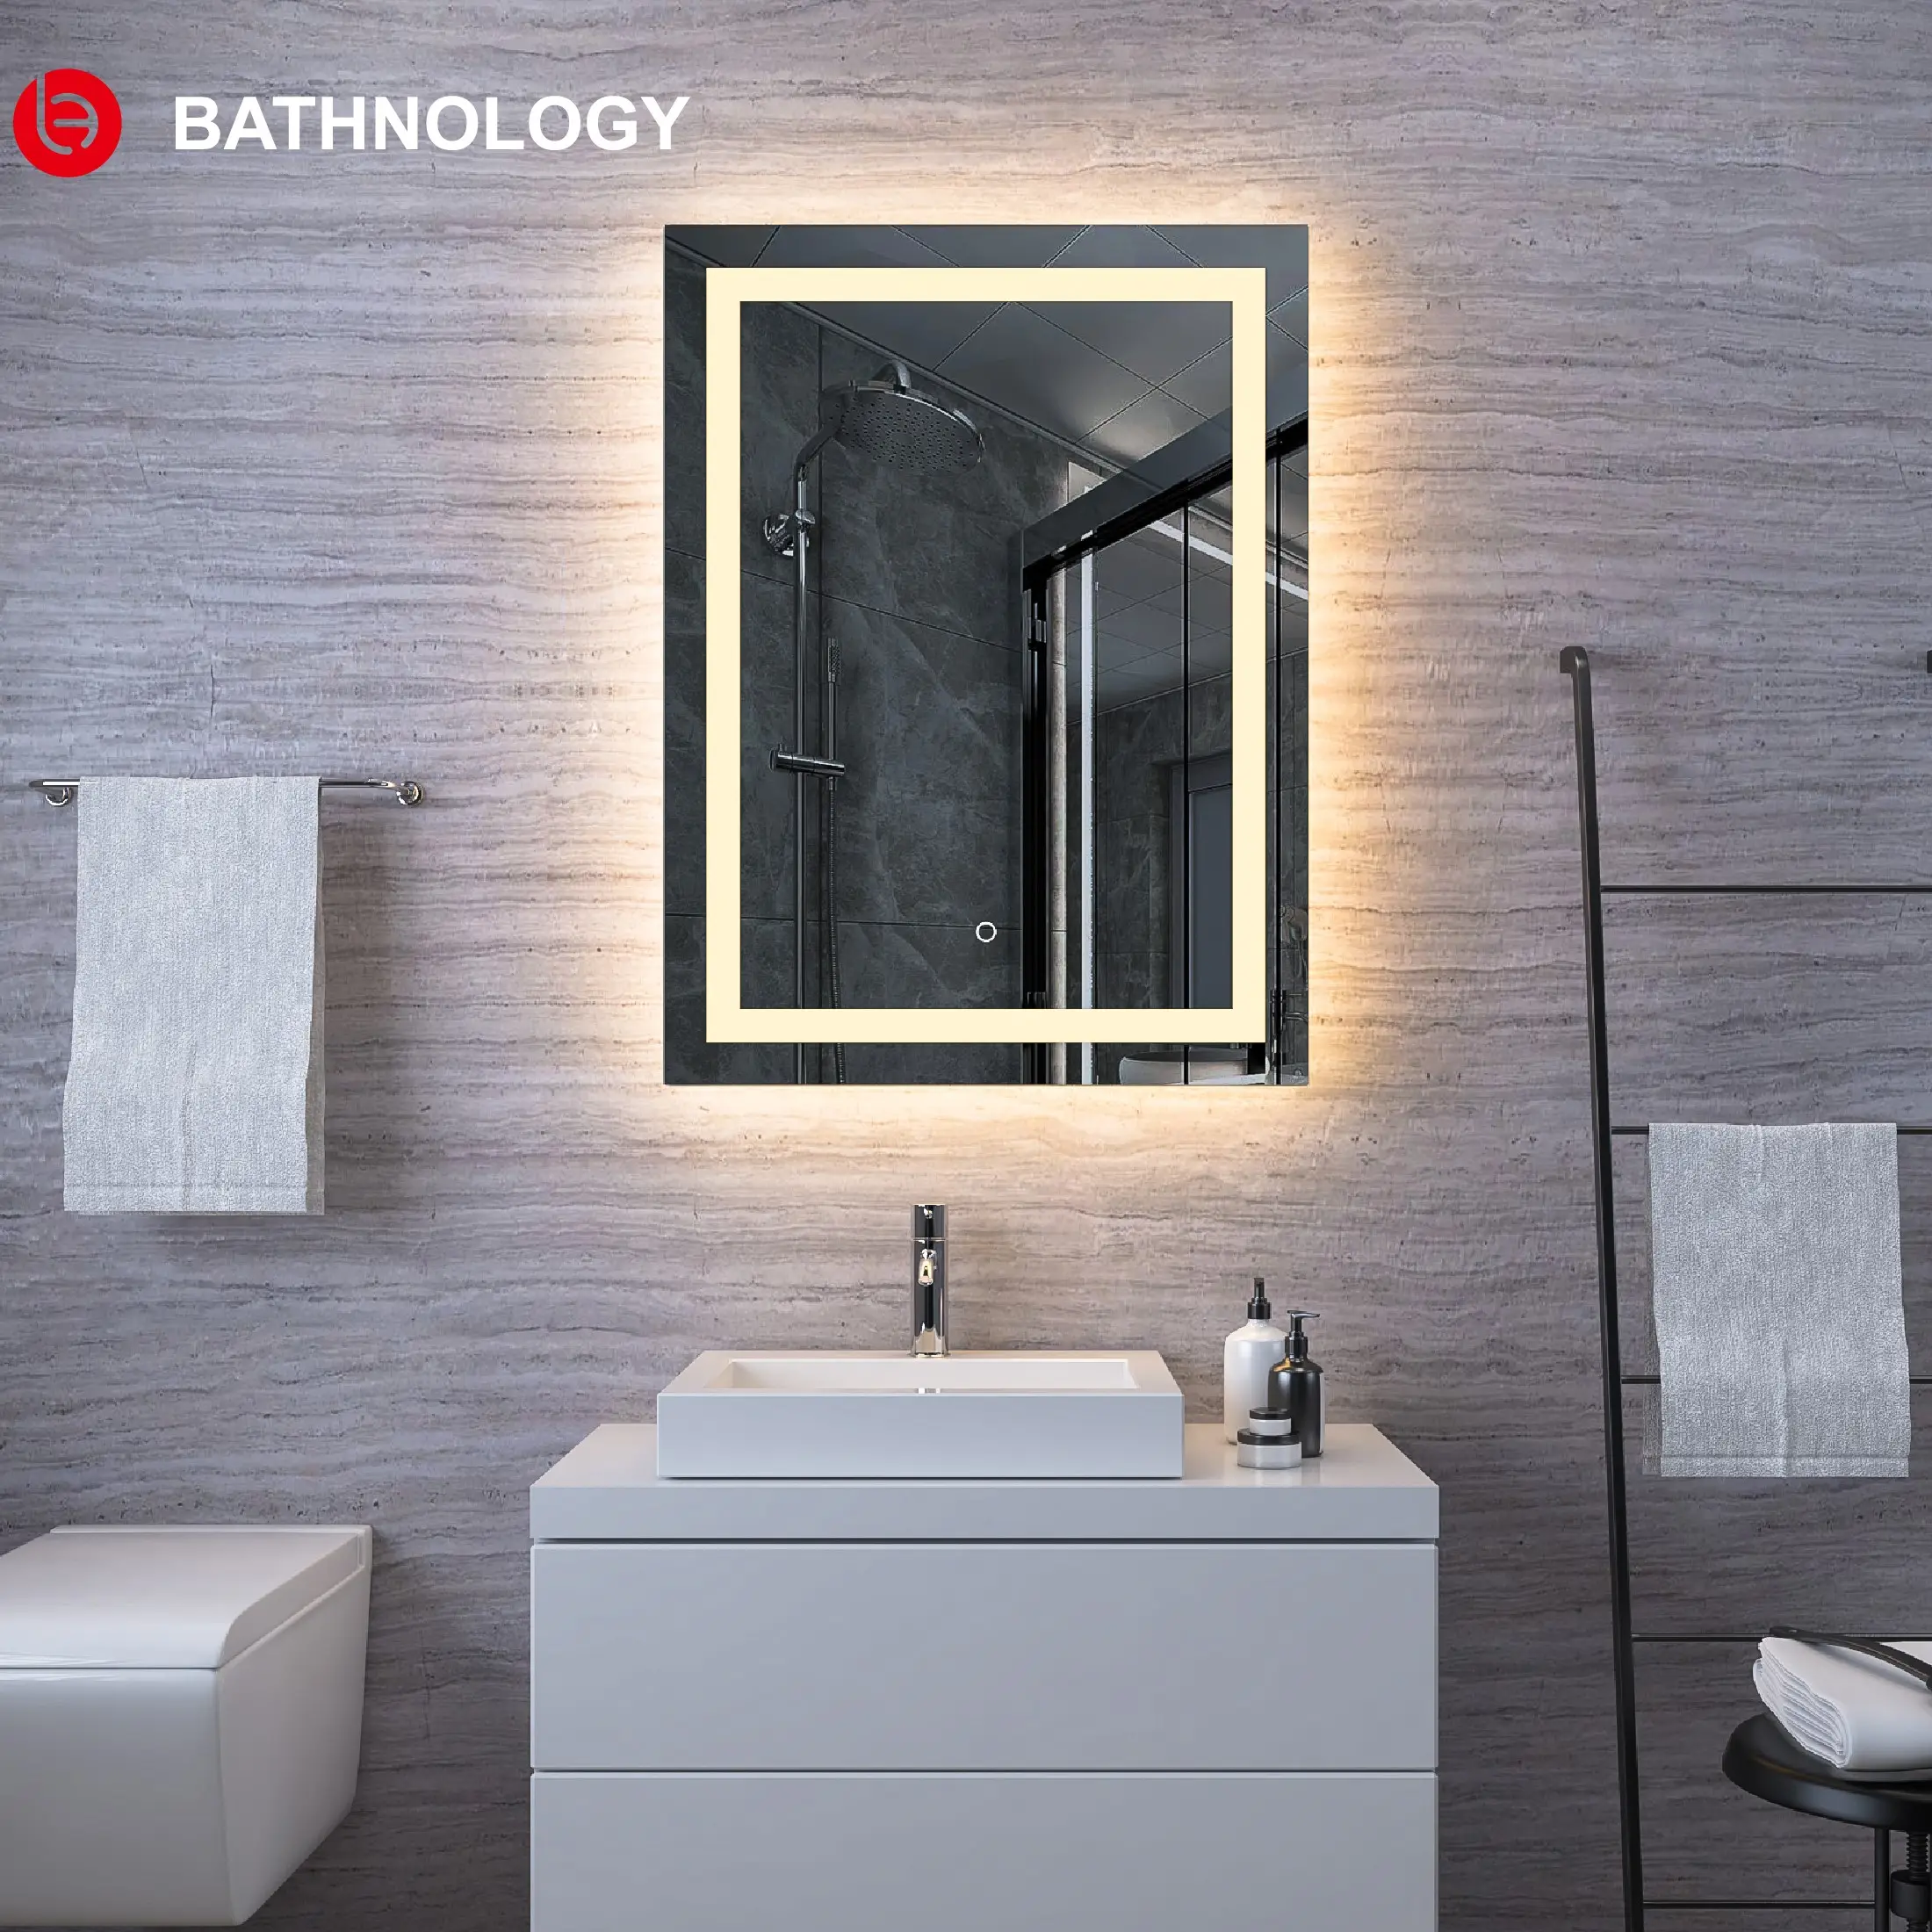 New Design Light with Bathroom Mirror Touch Switch Illuminated Magnifying Bathroom Led Mirror